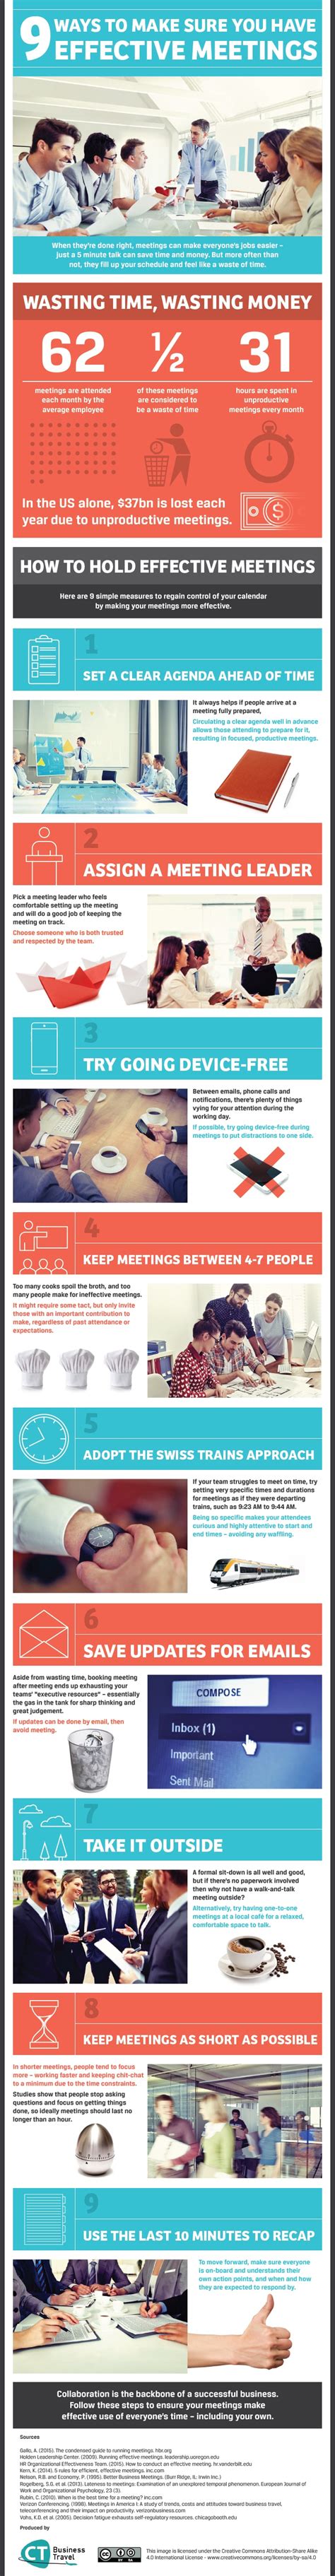 Are you wondering how to improve staff meetings? Tired of Useless Meetings? 9 Ways to Make Your Meetings ...